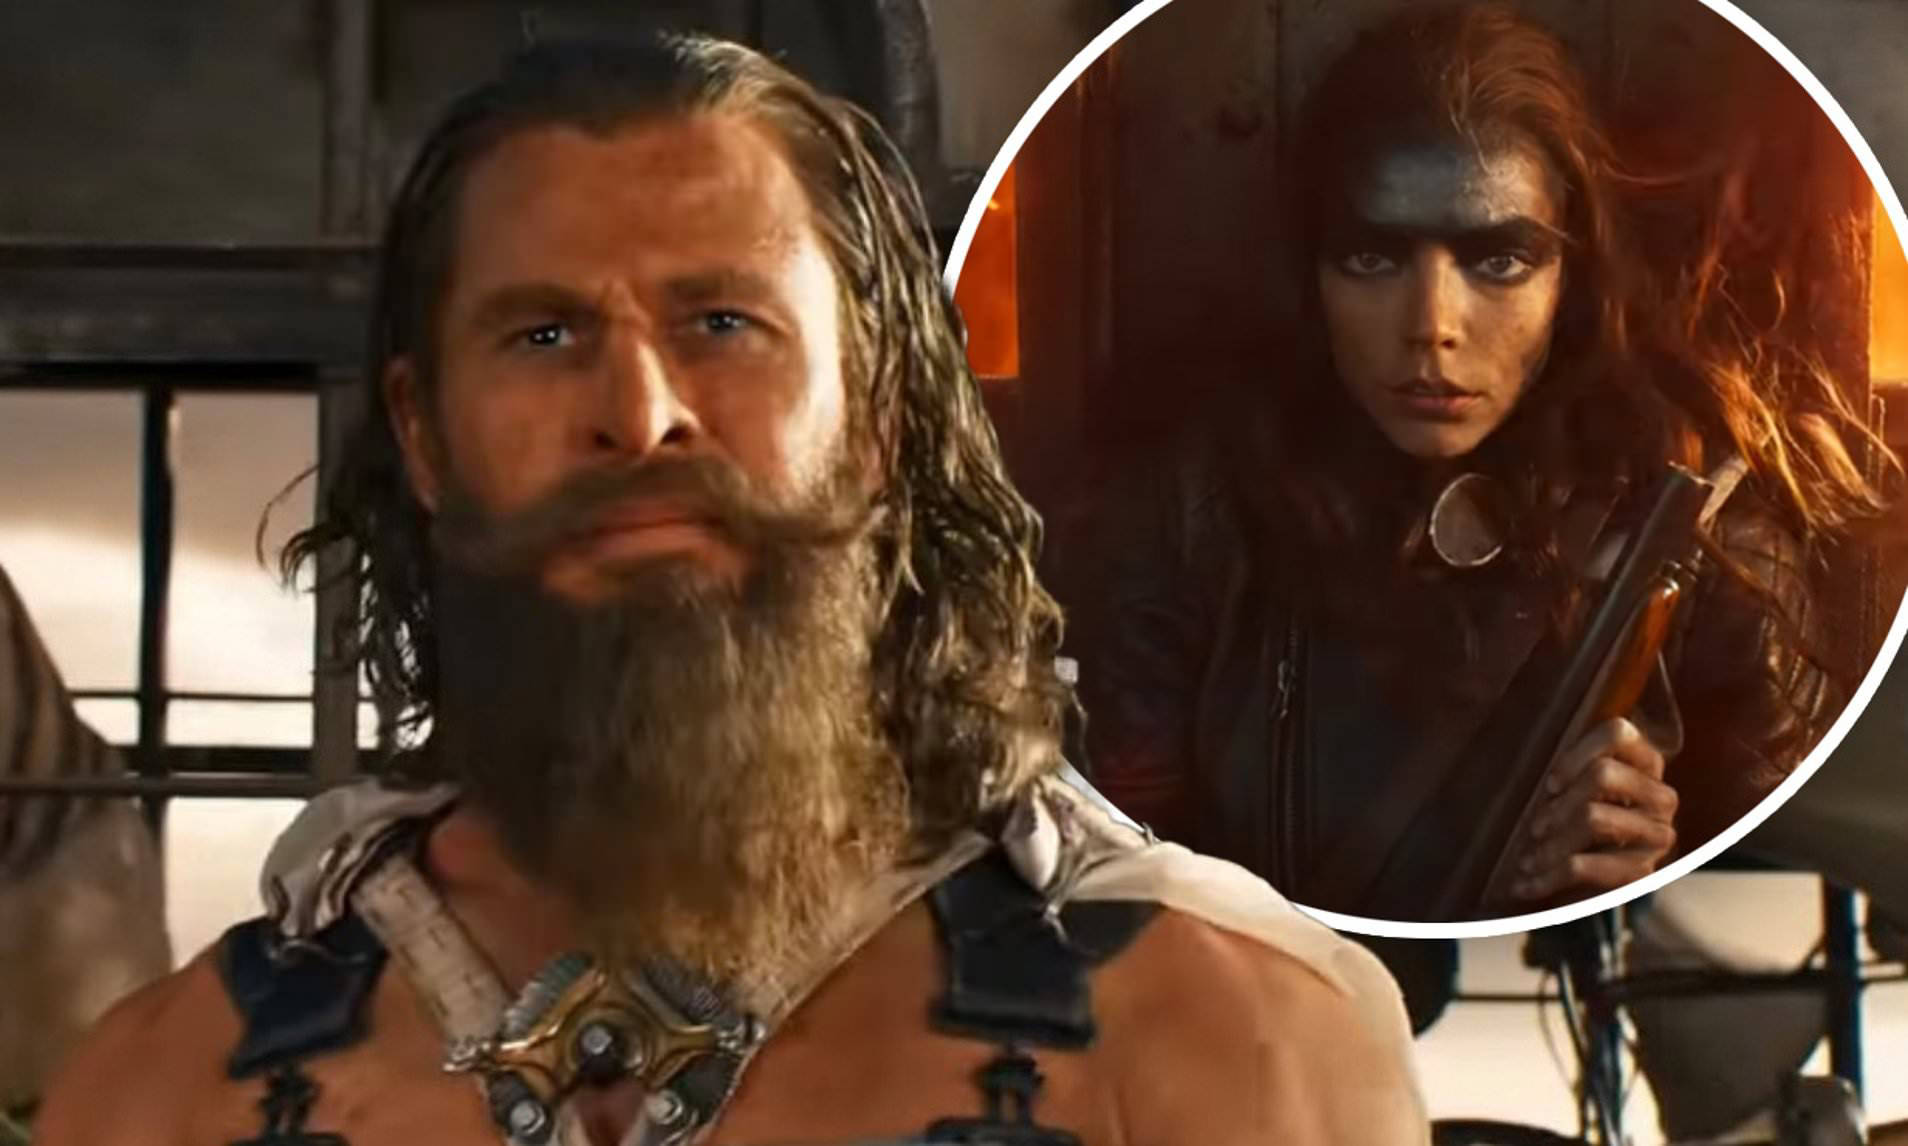 Chris Hemsworth is unrecognisable first trailer for Furiosa